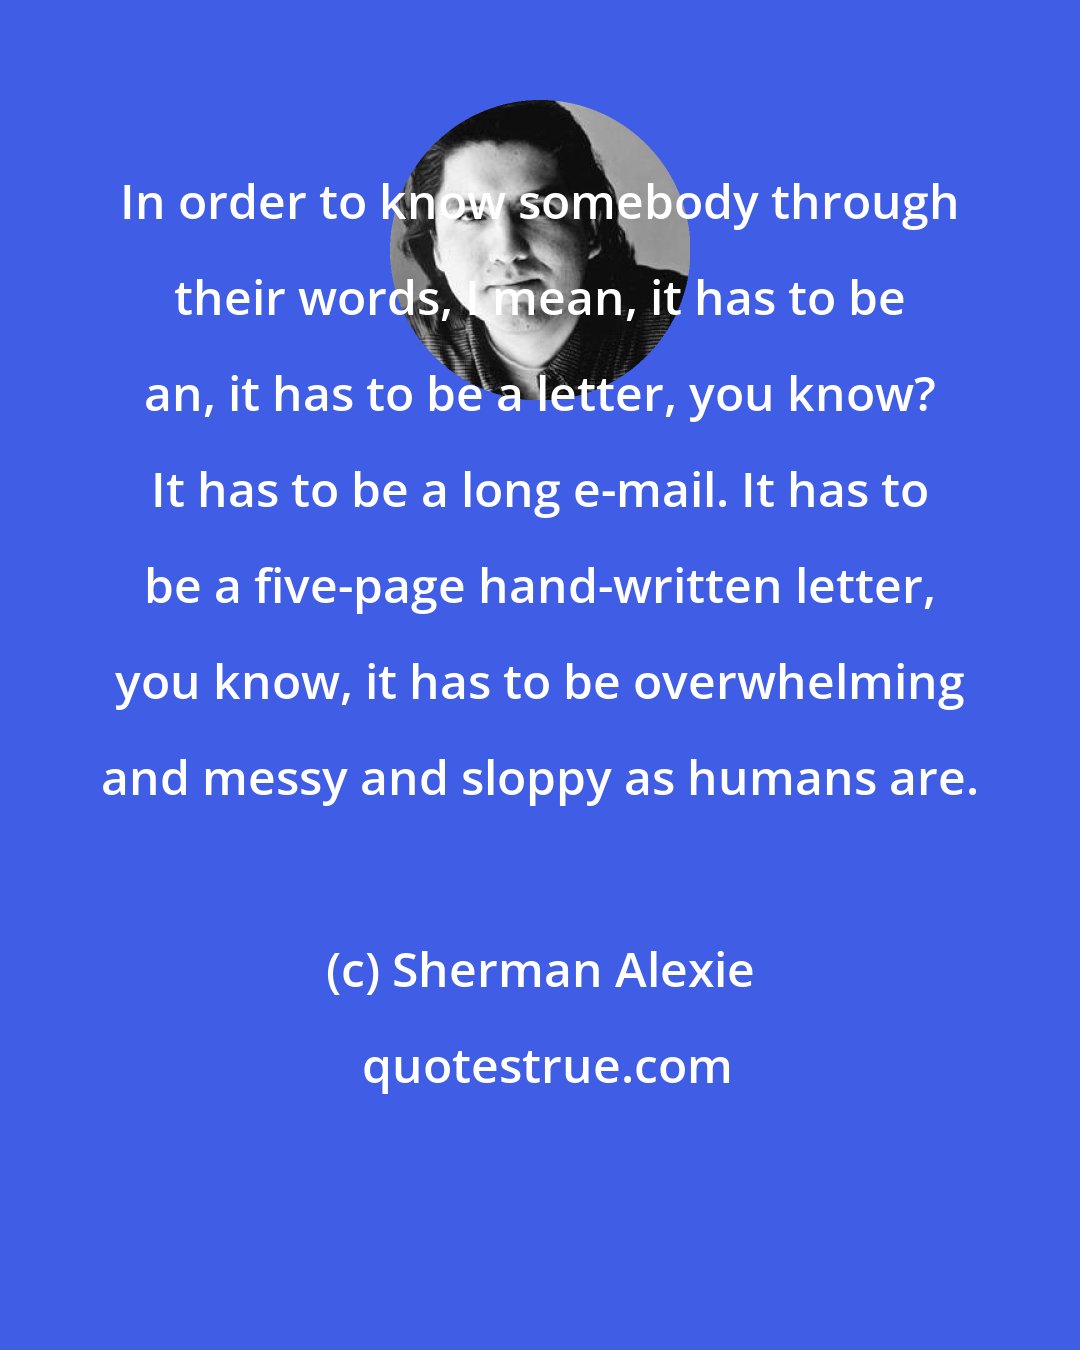 Sherman Alexie: In order to know somebody through their words, I mean, it has to be an, it has to be a letter, you know? It has to be a long e-mail. It has to be a five-page hand-written letter, you know, it has to be overwhelming and messy and sloppy as humans are.